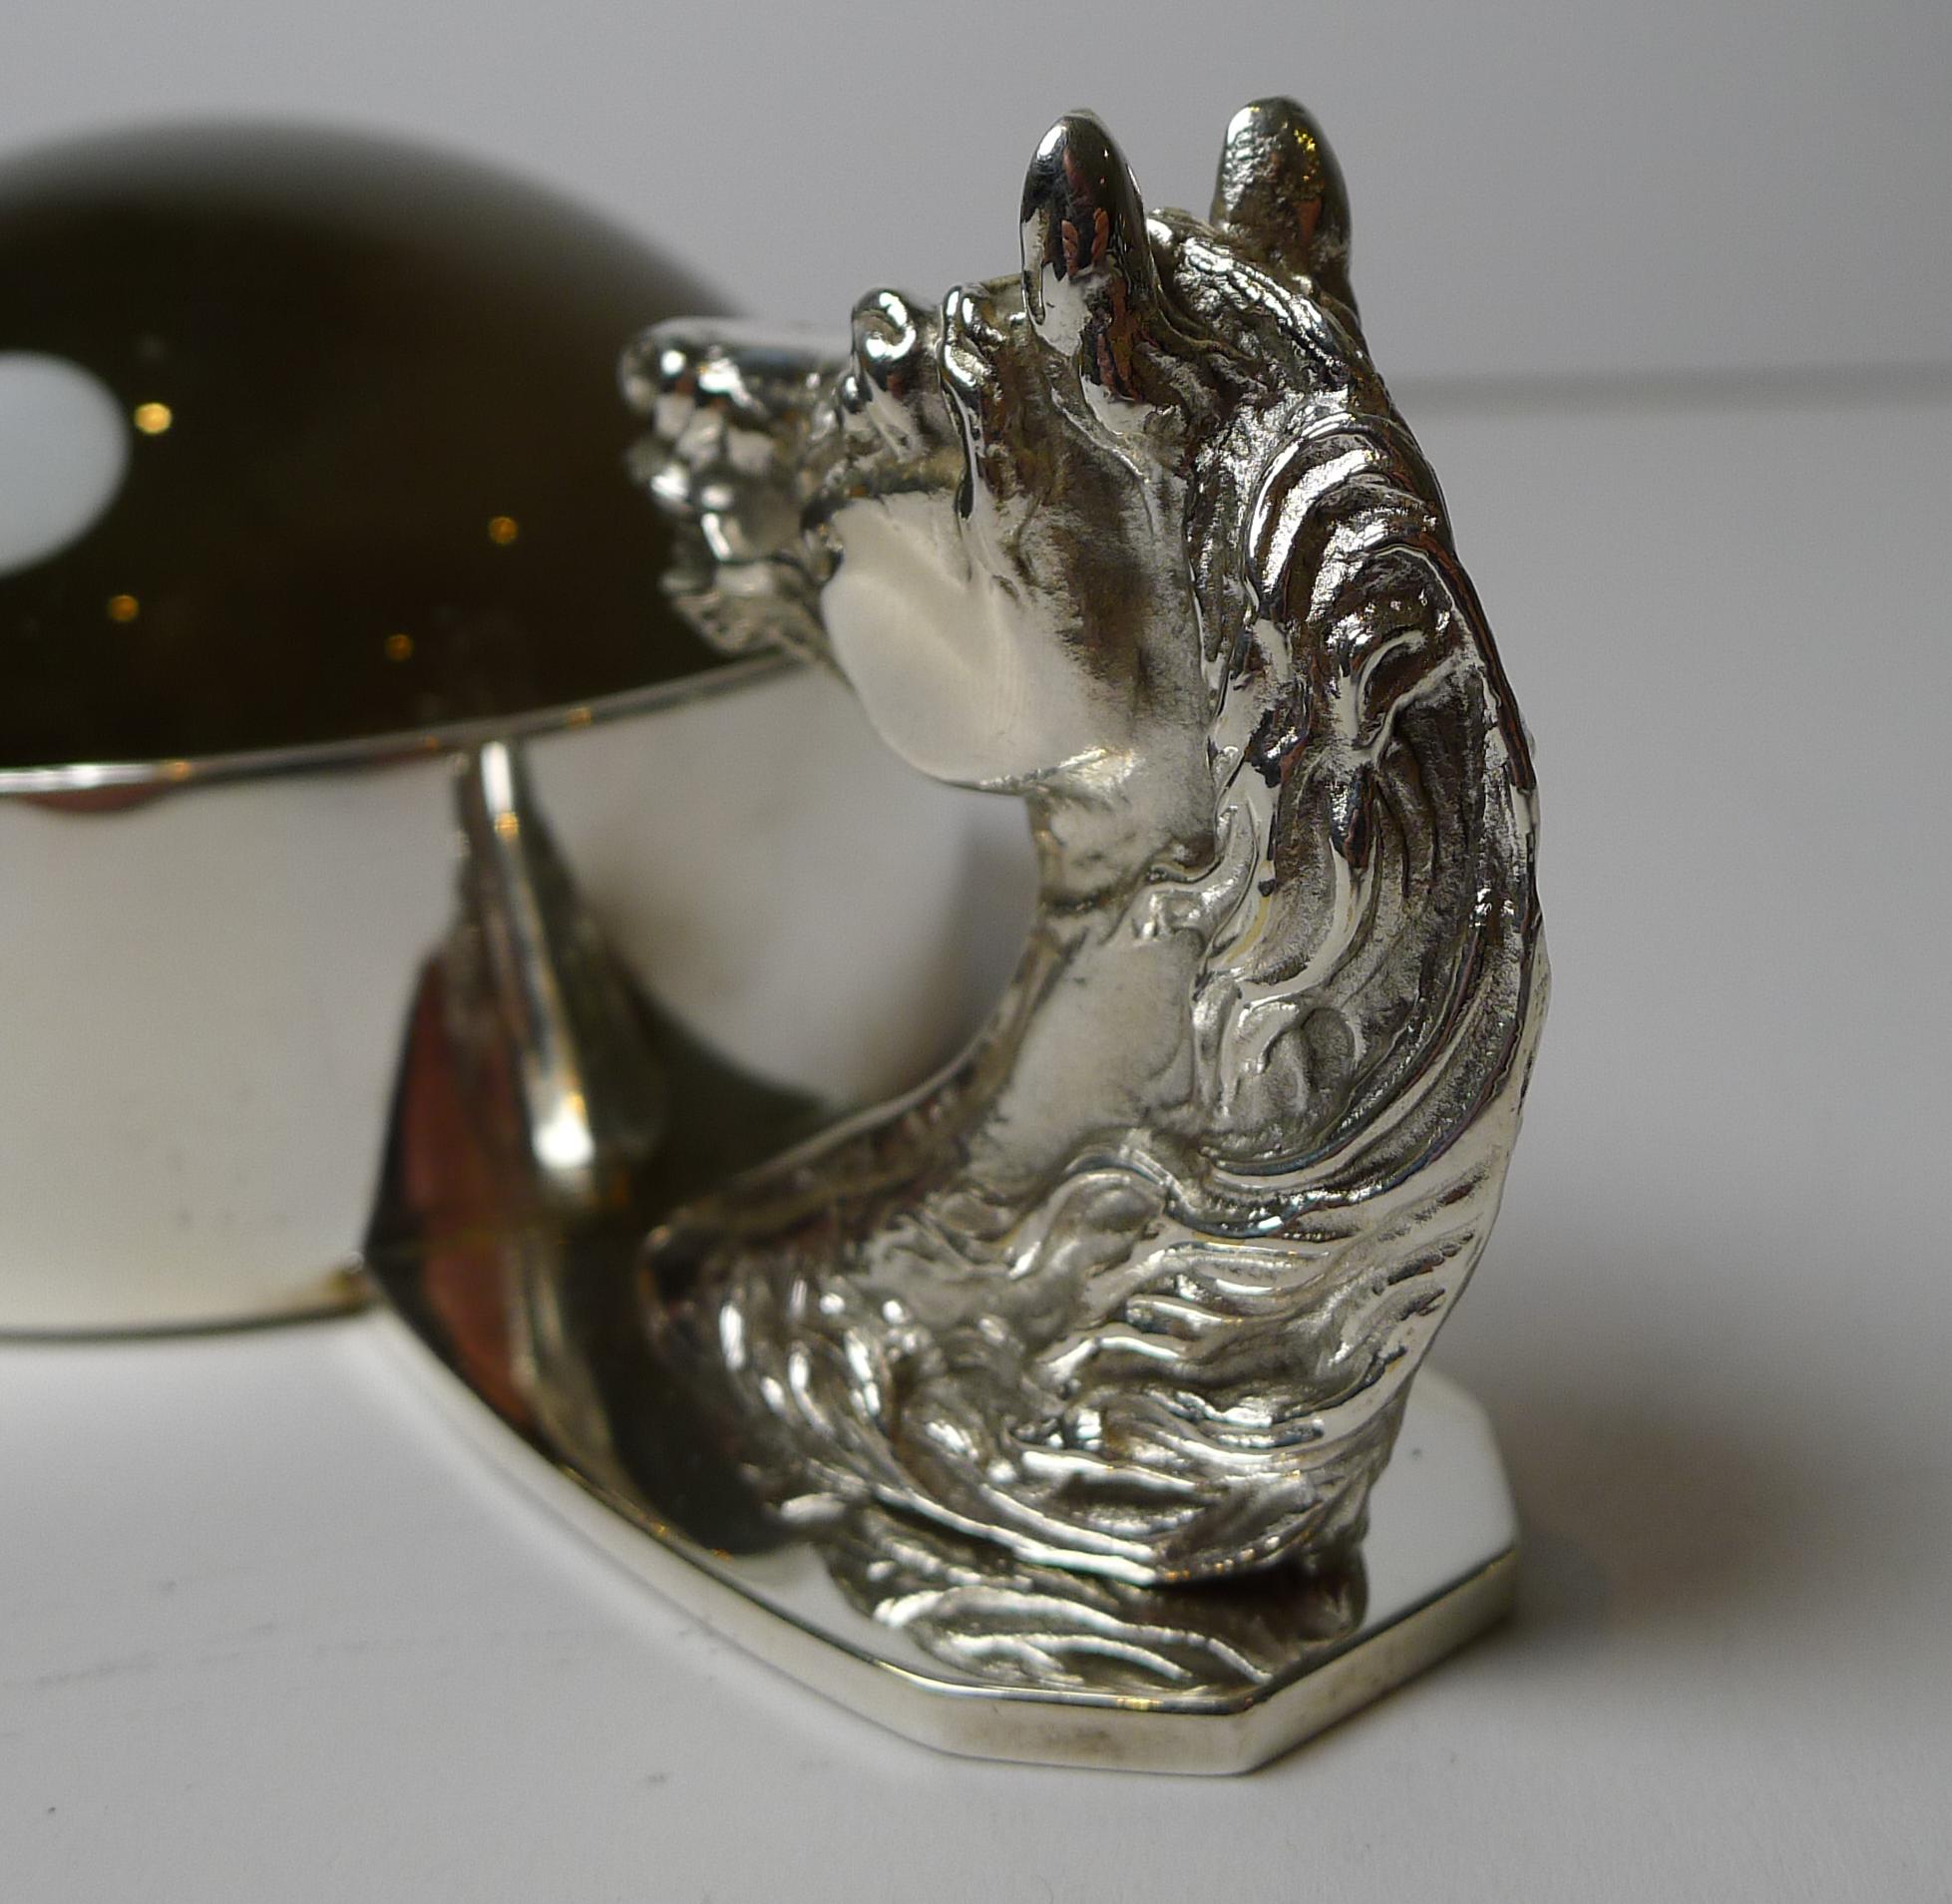 Hermes, Paris, Equestrian Horse Head Magnifying Glass c.1960 In Good Condition For Sale In Bath, GB